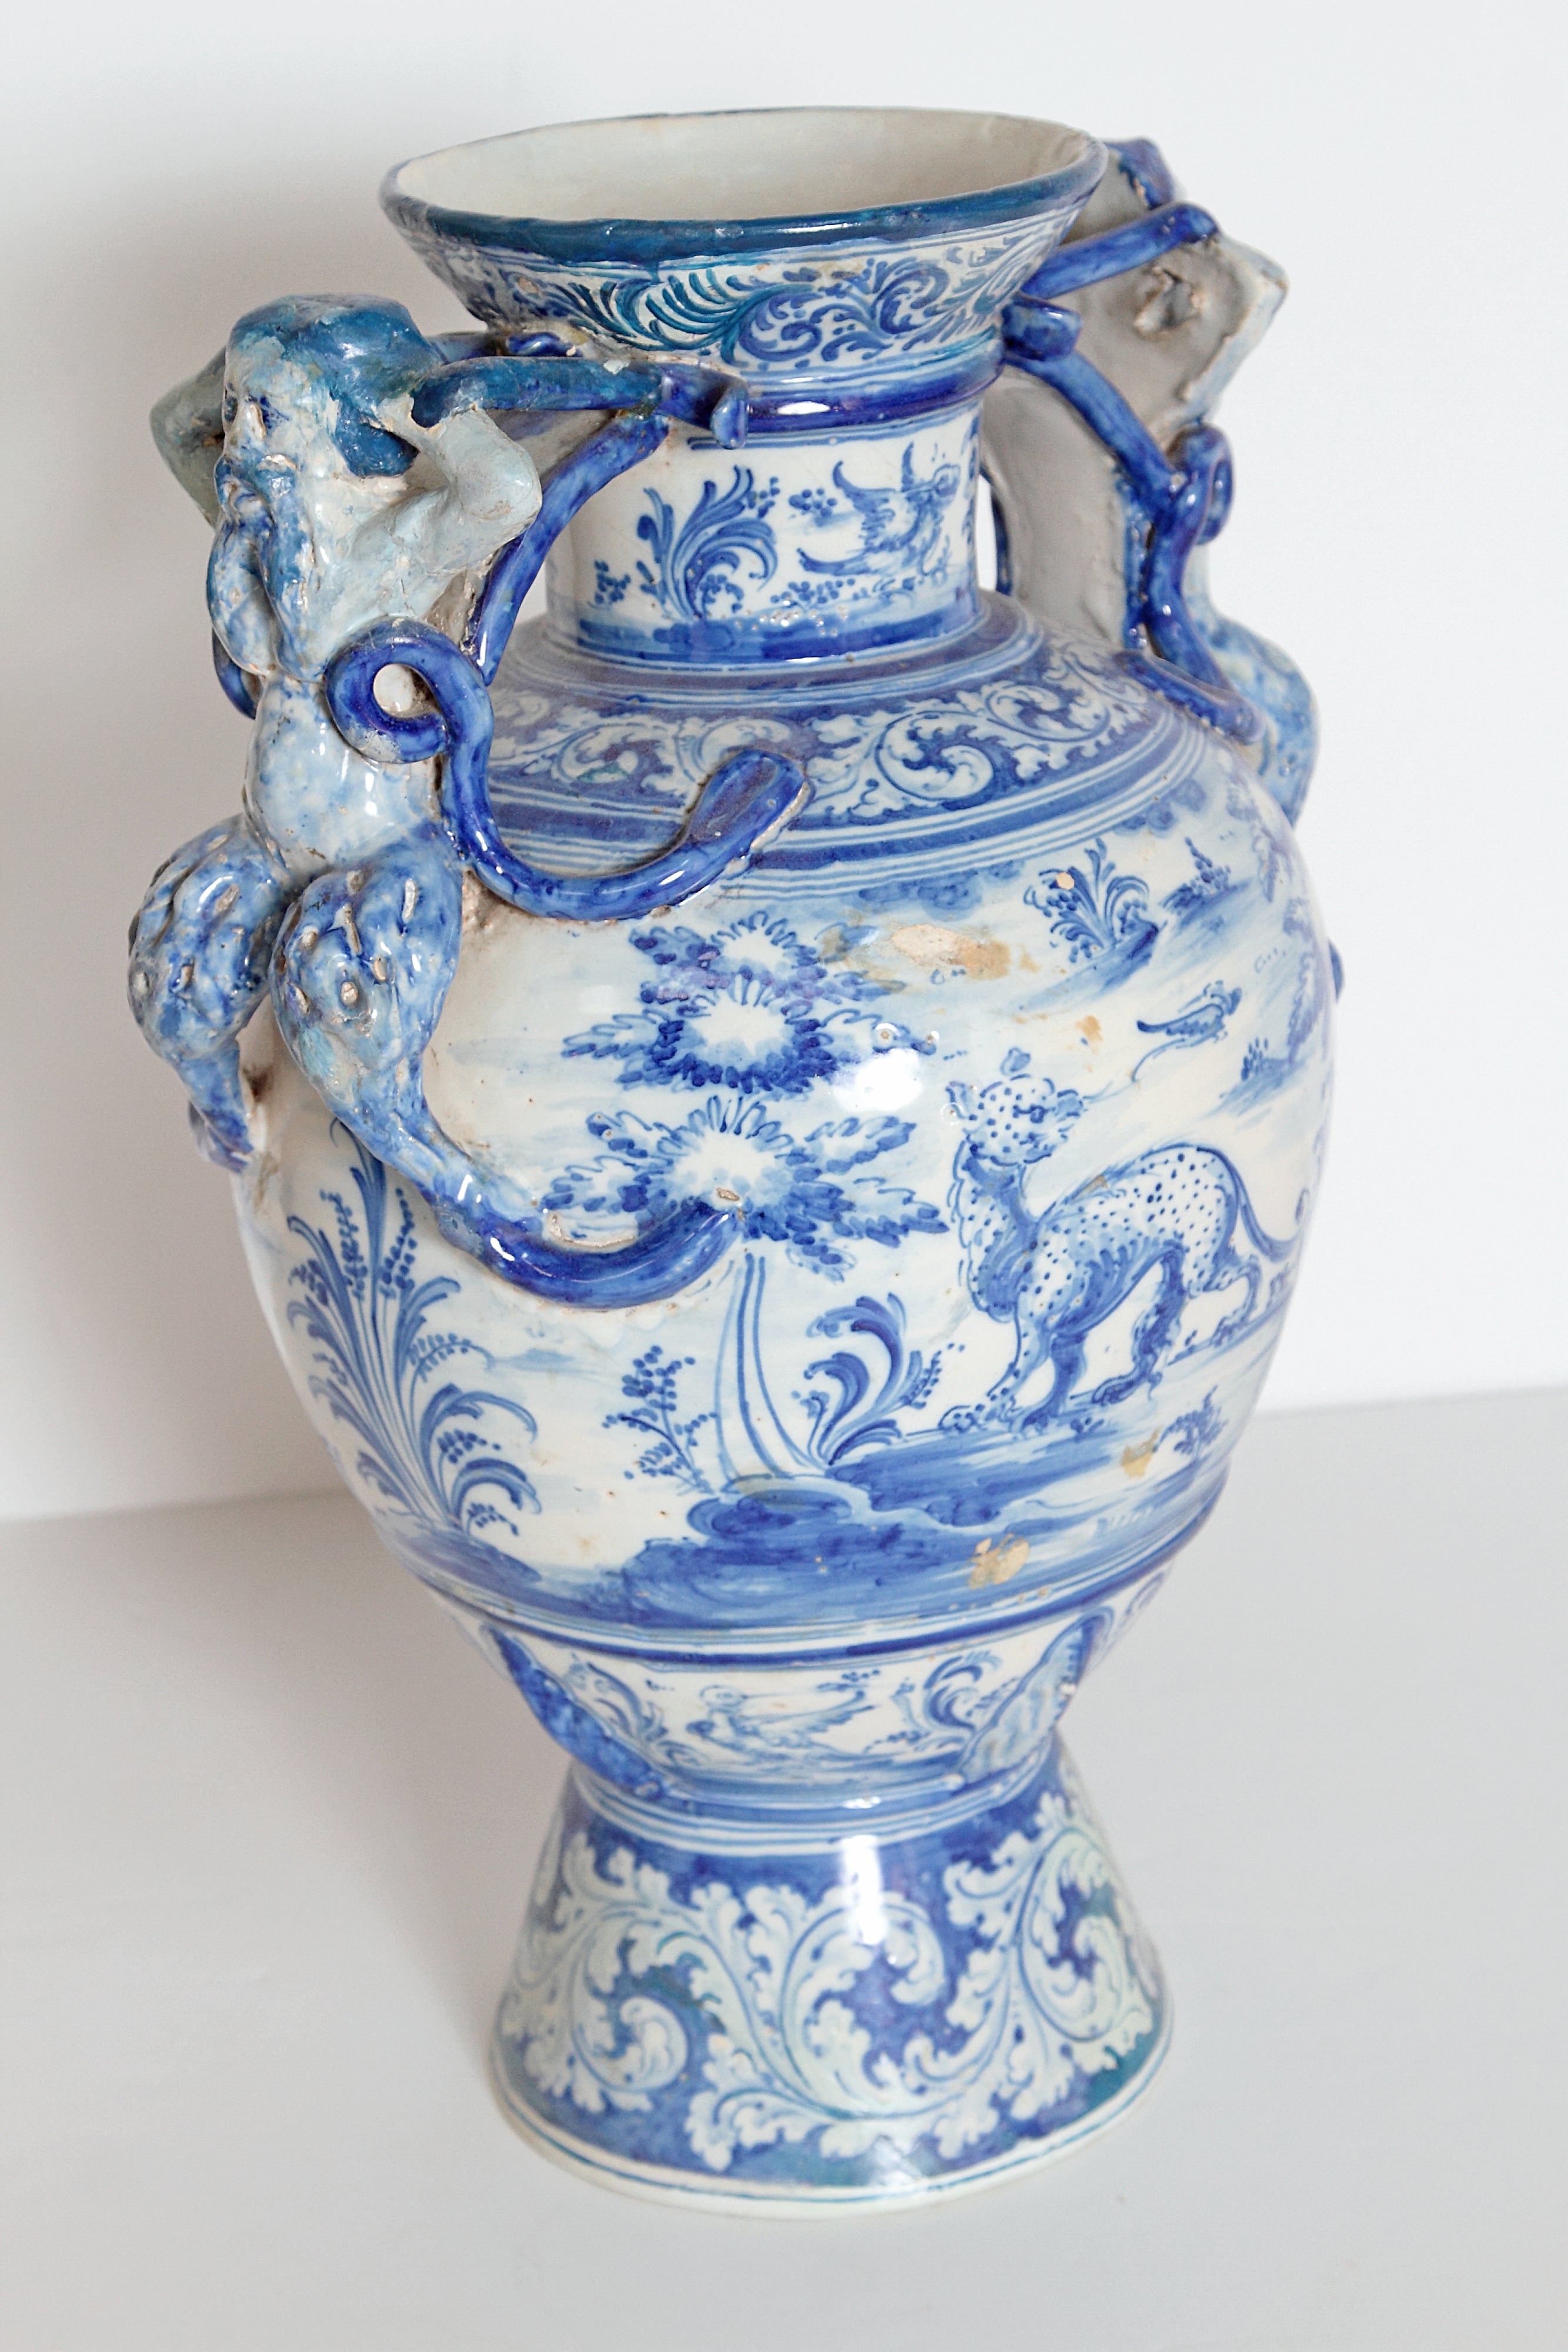 A Large Italian Blue and White Delft-Style Vase